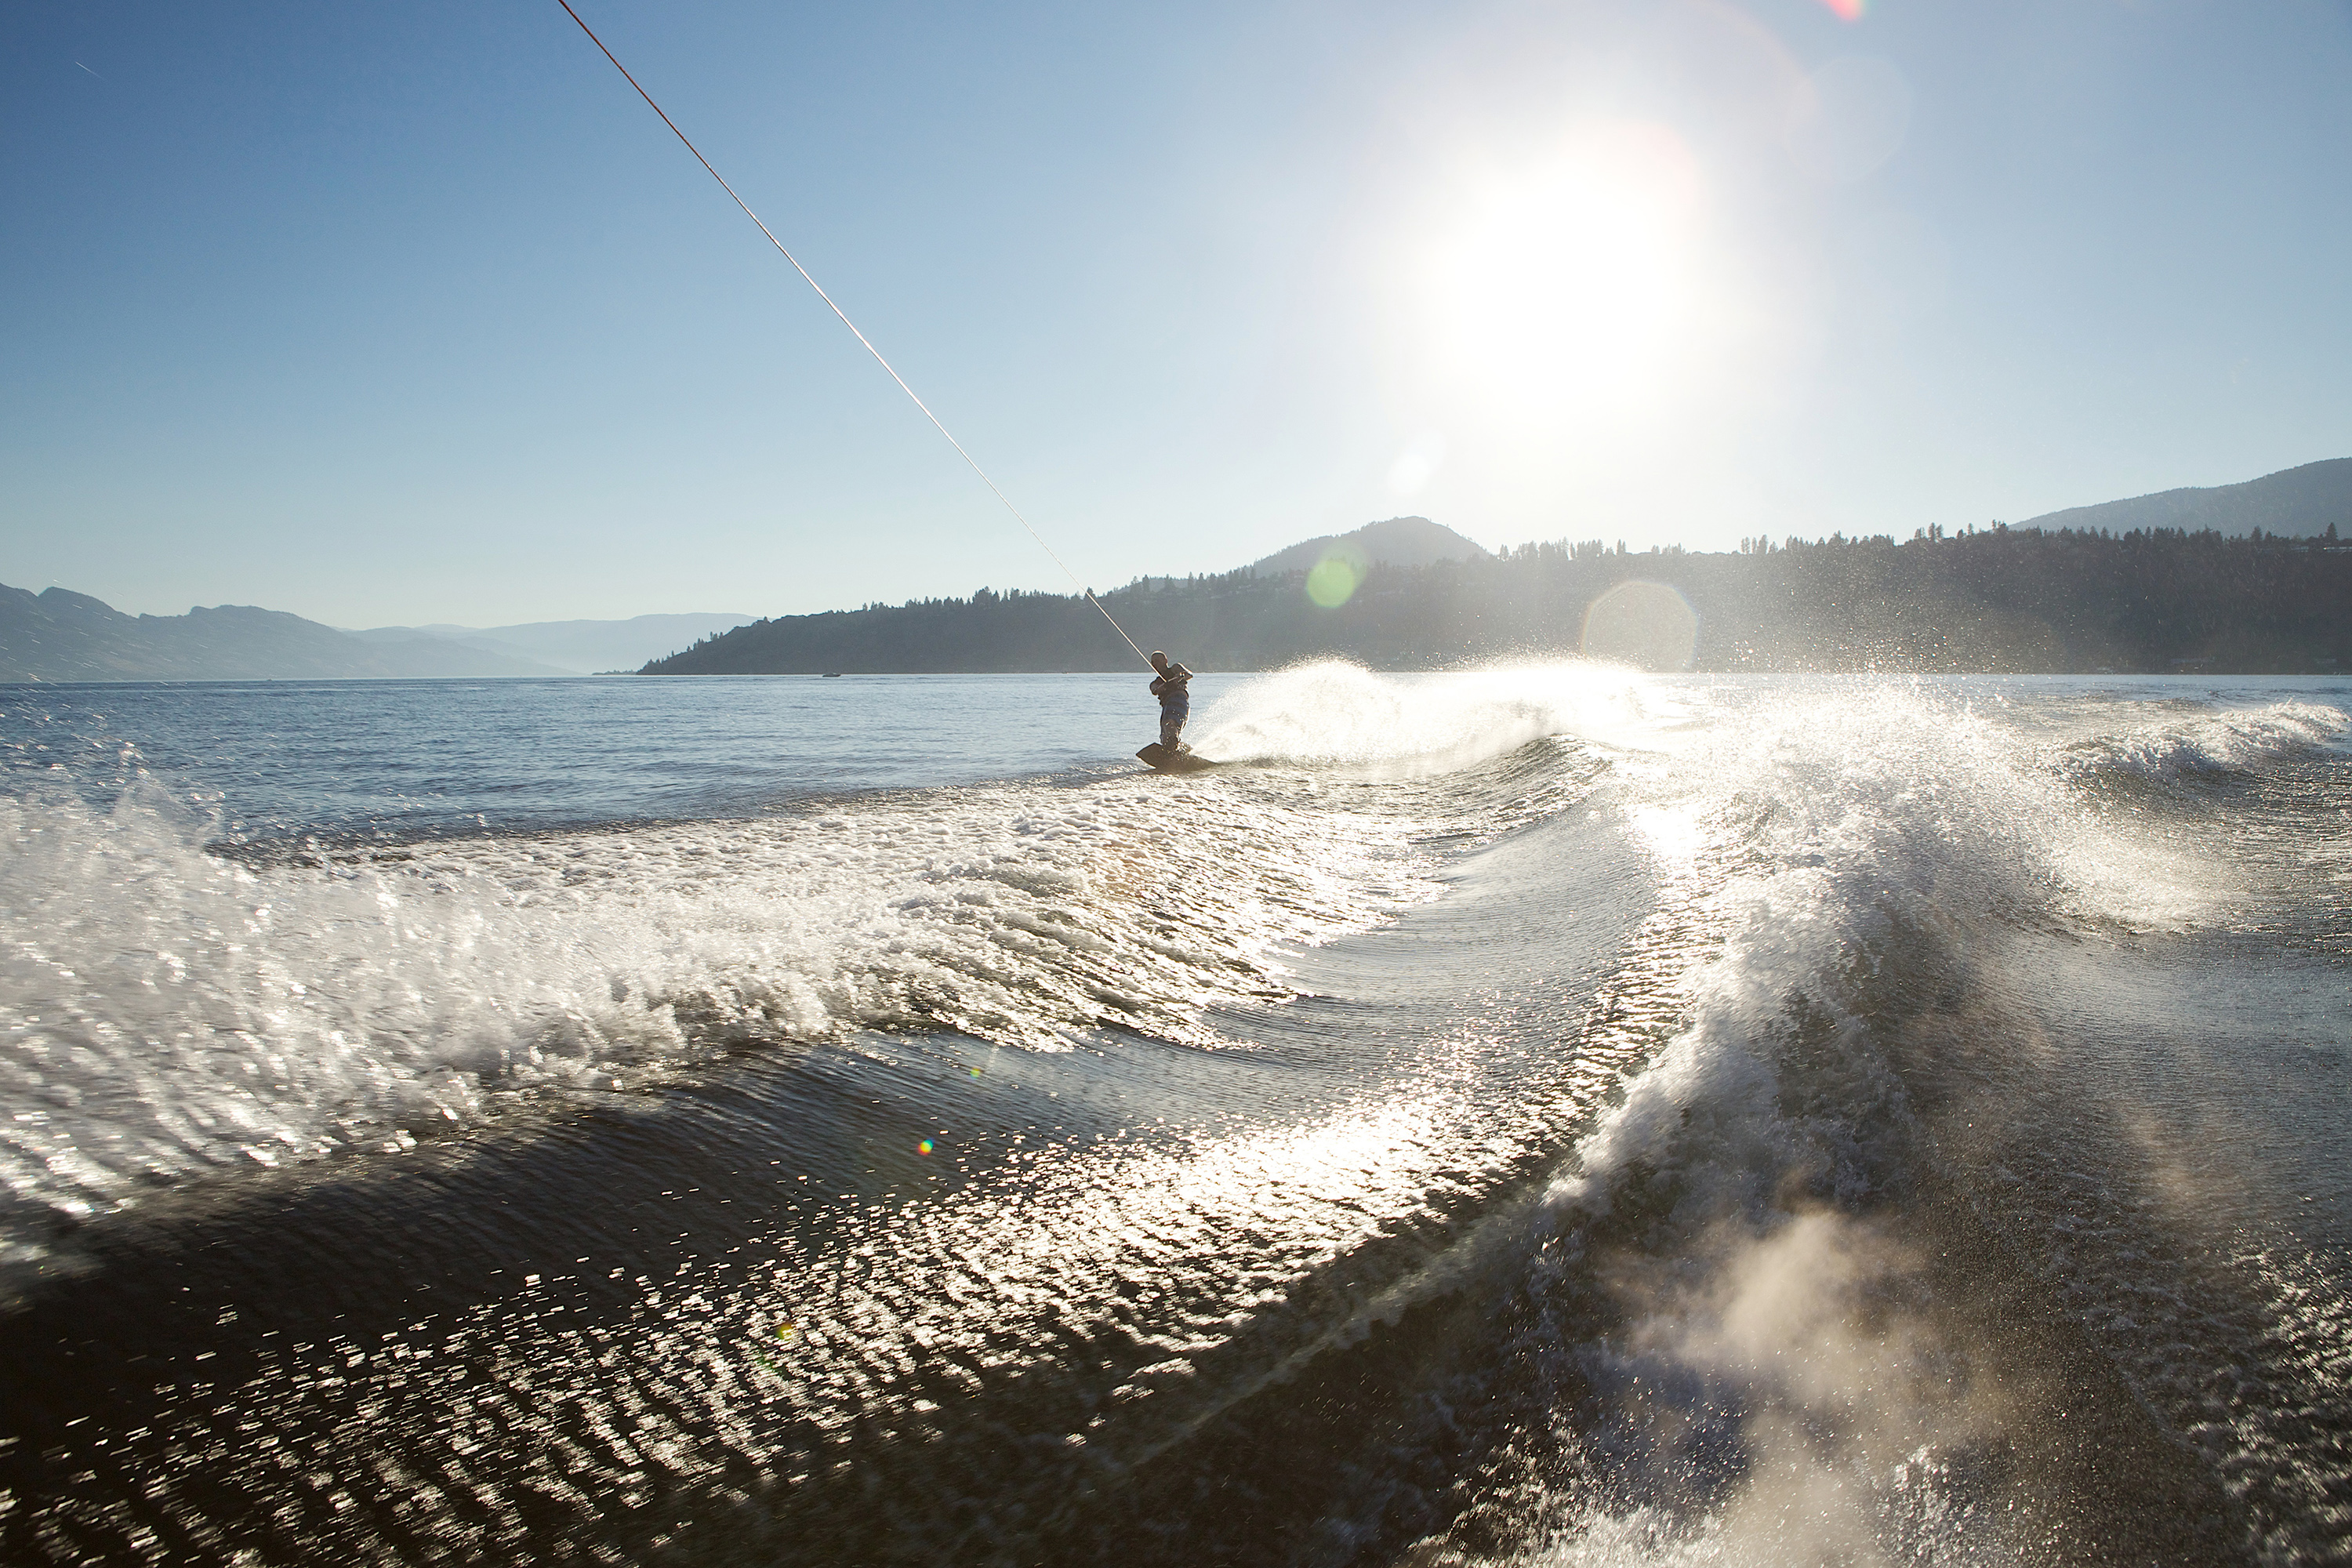 a wakeboarder on Okanagan lake, one of the popular summer sports in Kelowna